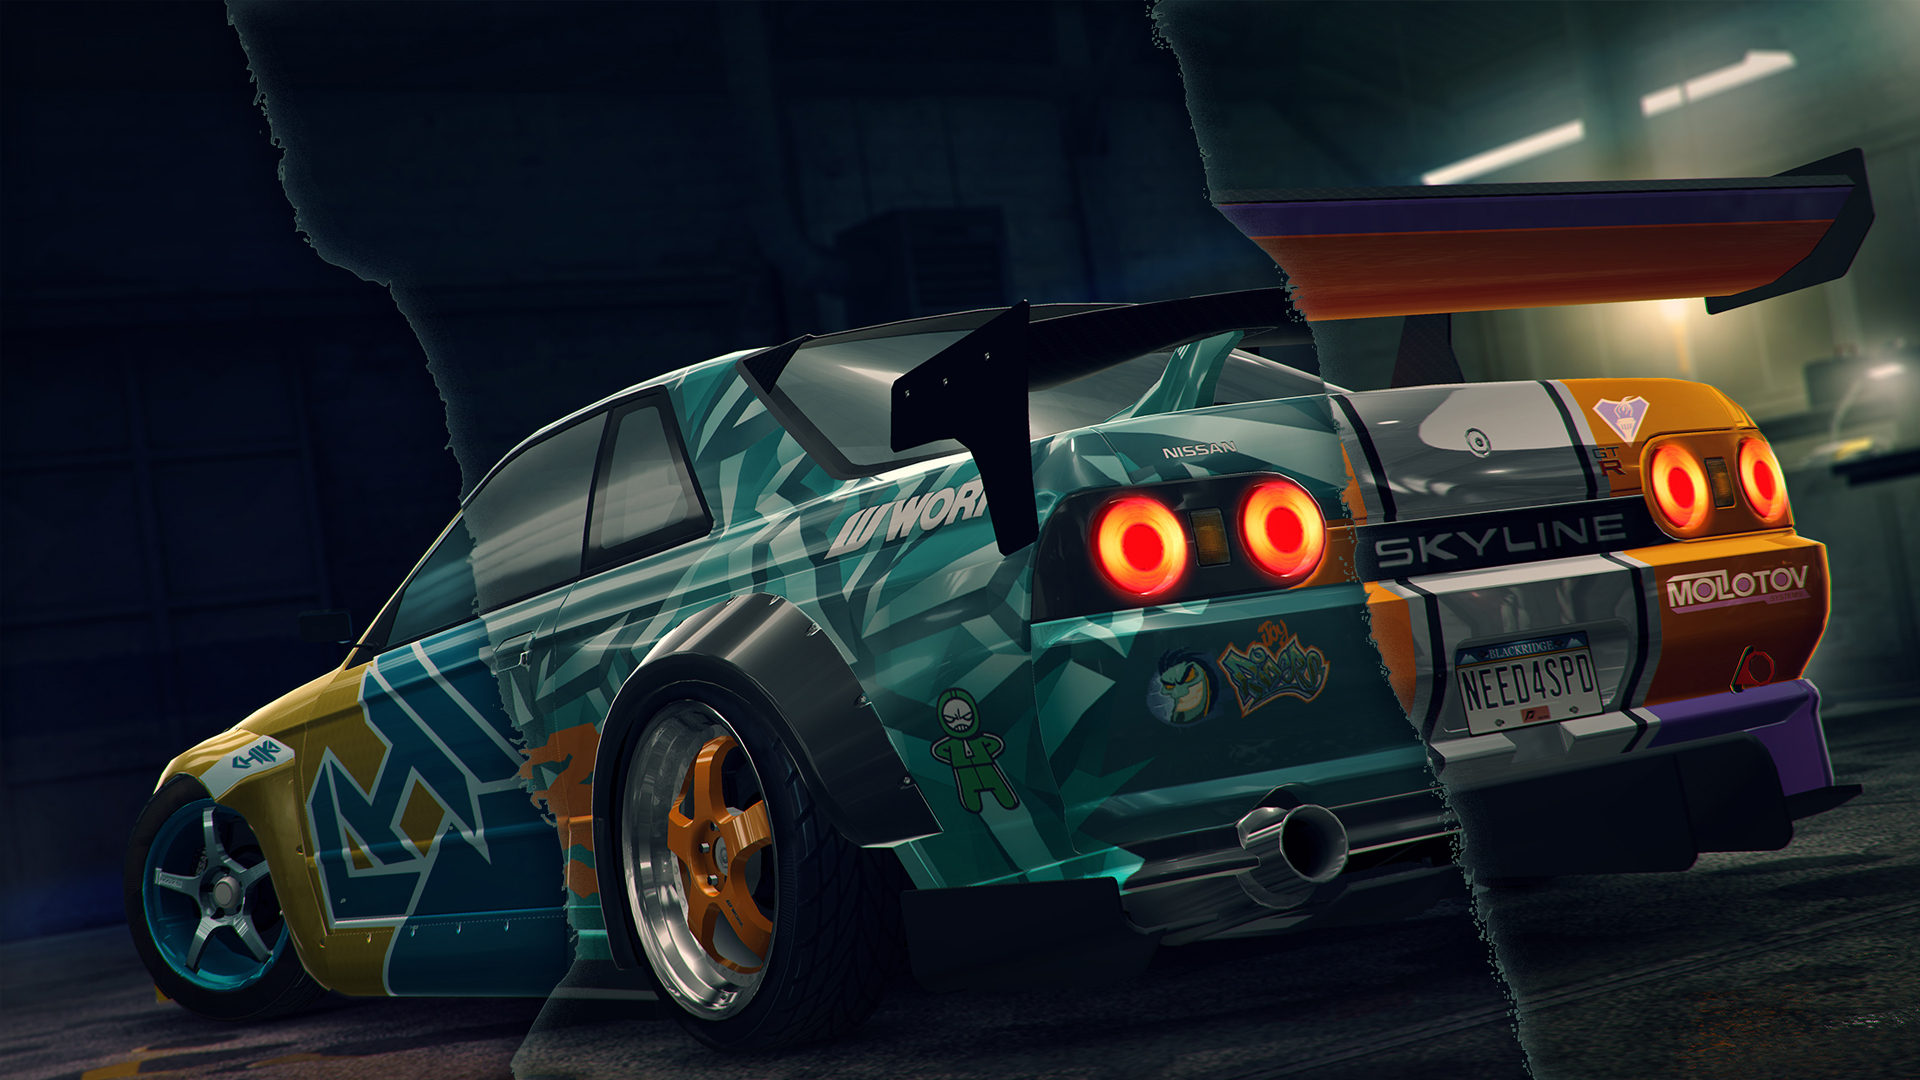 Need For Speed No Limits Video Games Tuning Nissan Skyline R32 Garages JDM Tailights Rims Need For S 1920x1080